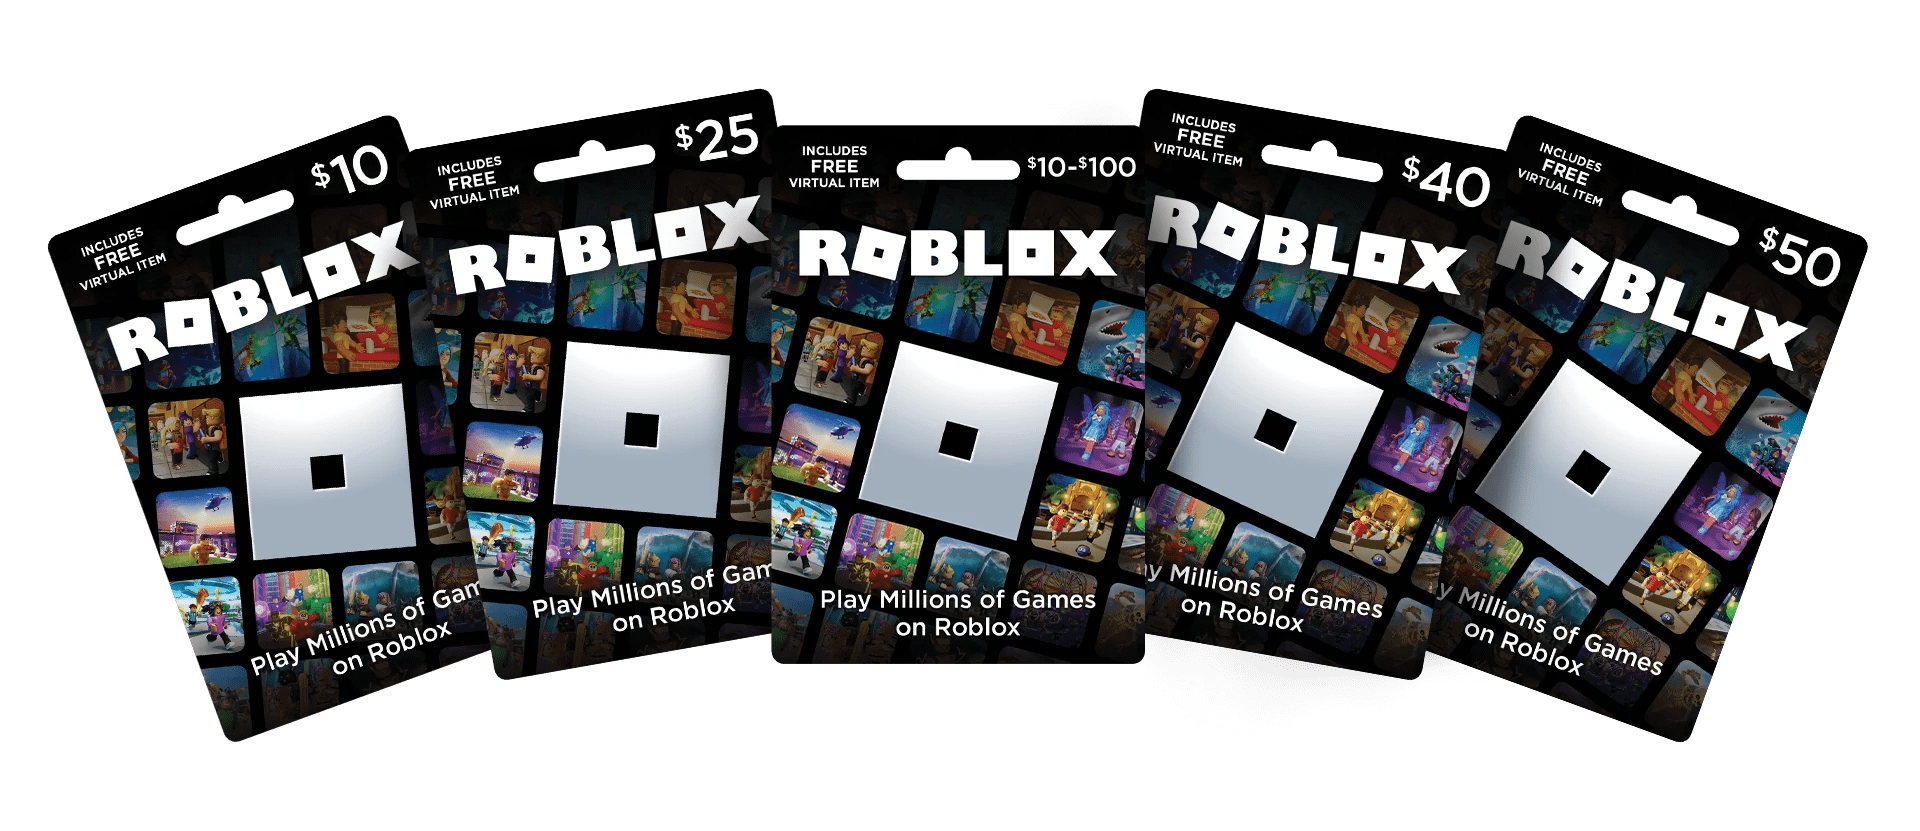 Unredeemed roblox gift cards